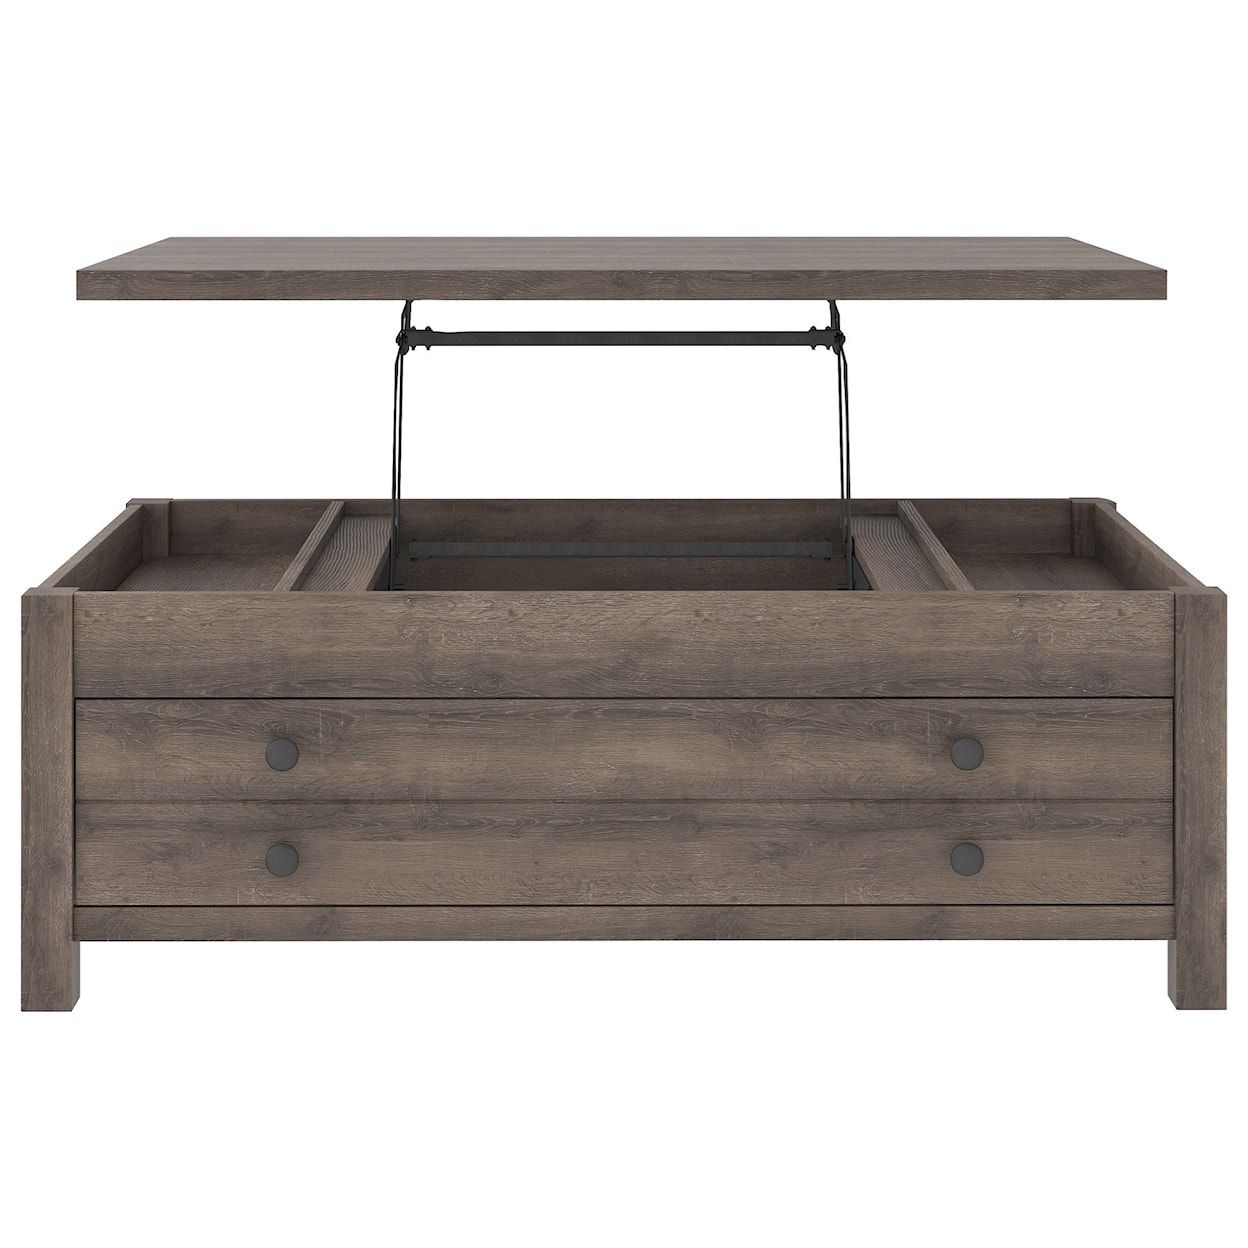 Signature Design by Ashley Furniture Arlenbry Rectangular Lift Top Cocktail Table